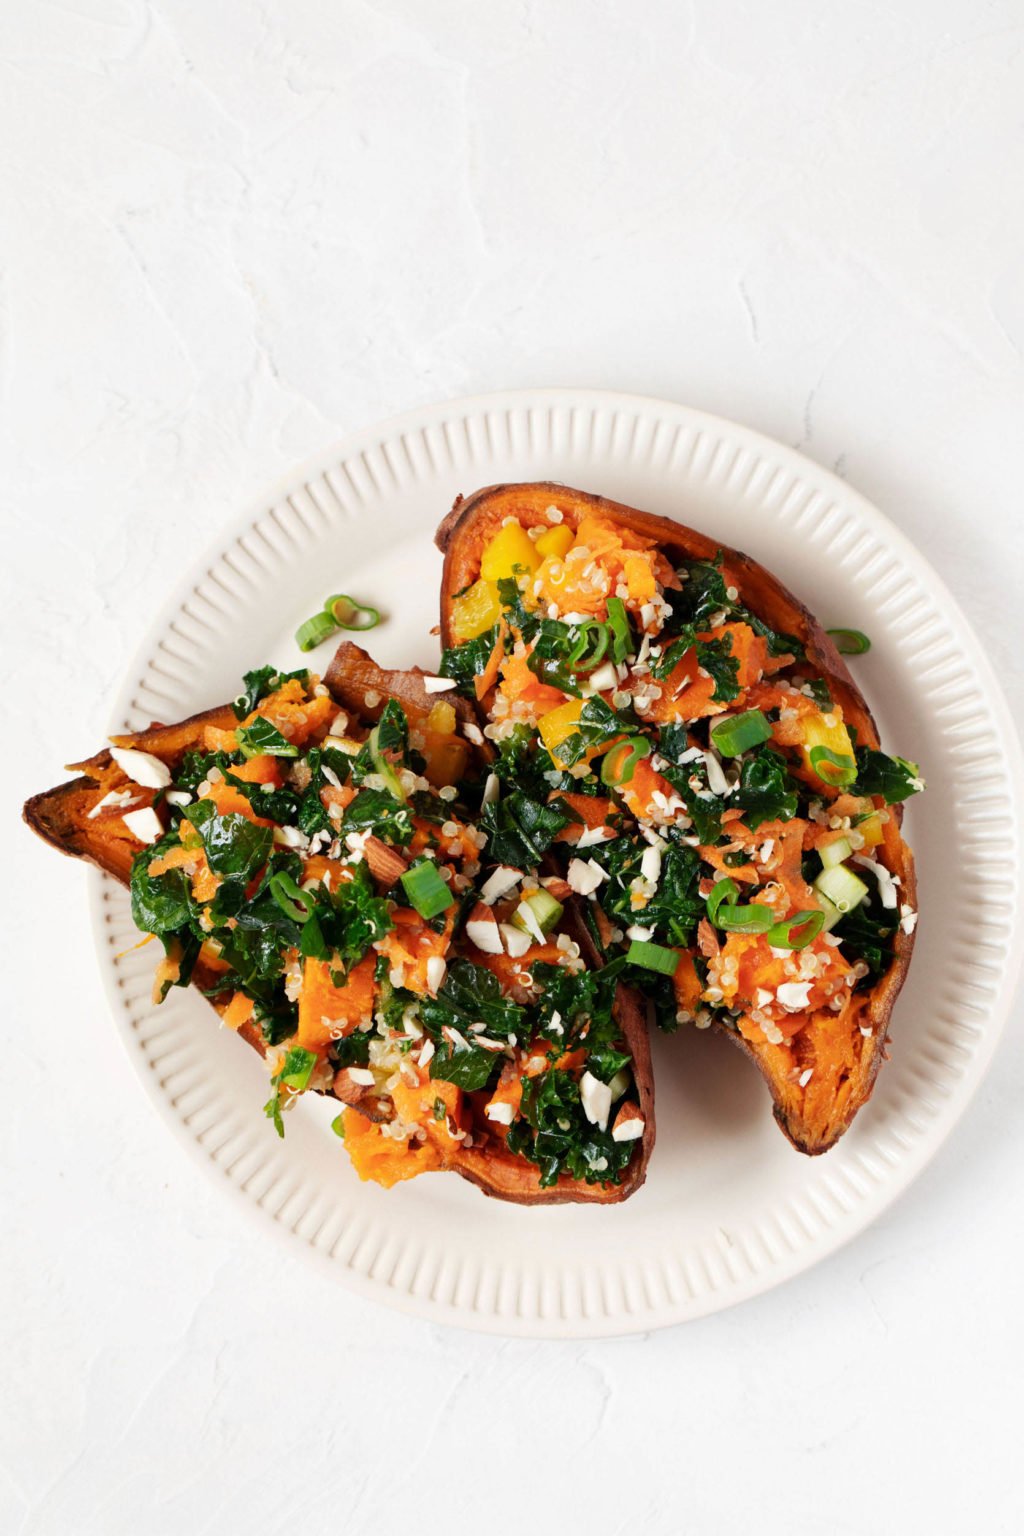 A white, cream-colored, fluted plate holds two stuffed sweet potato skins. They're filled with a colorful vegetable salad.